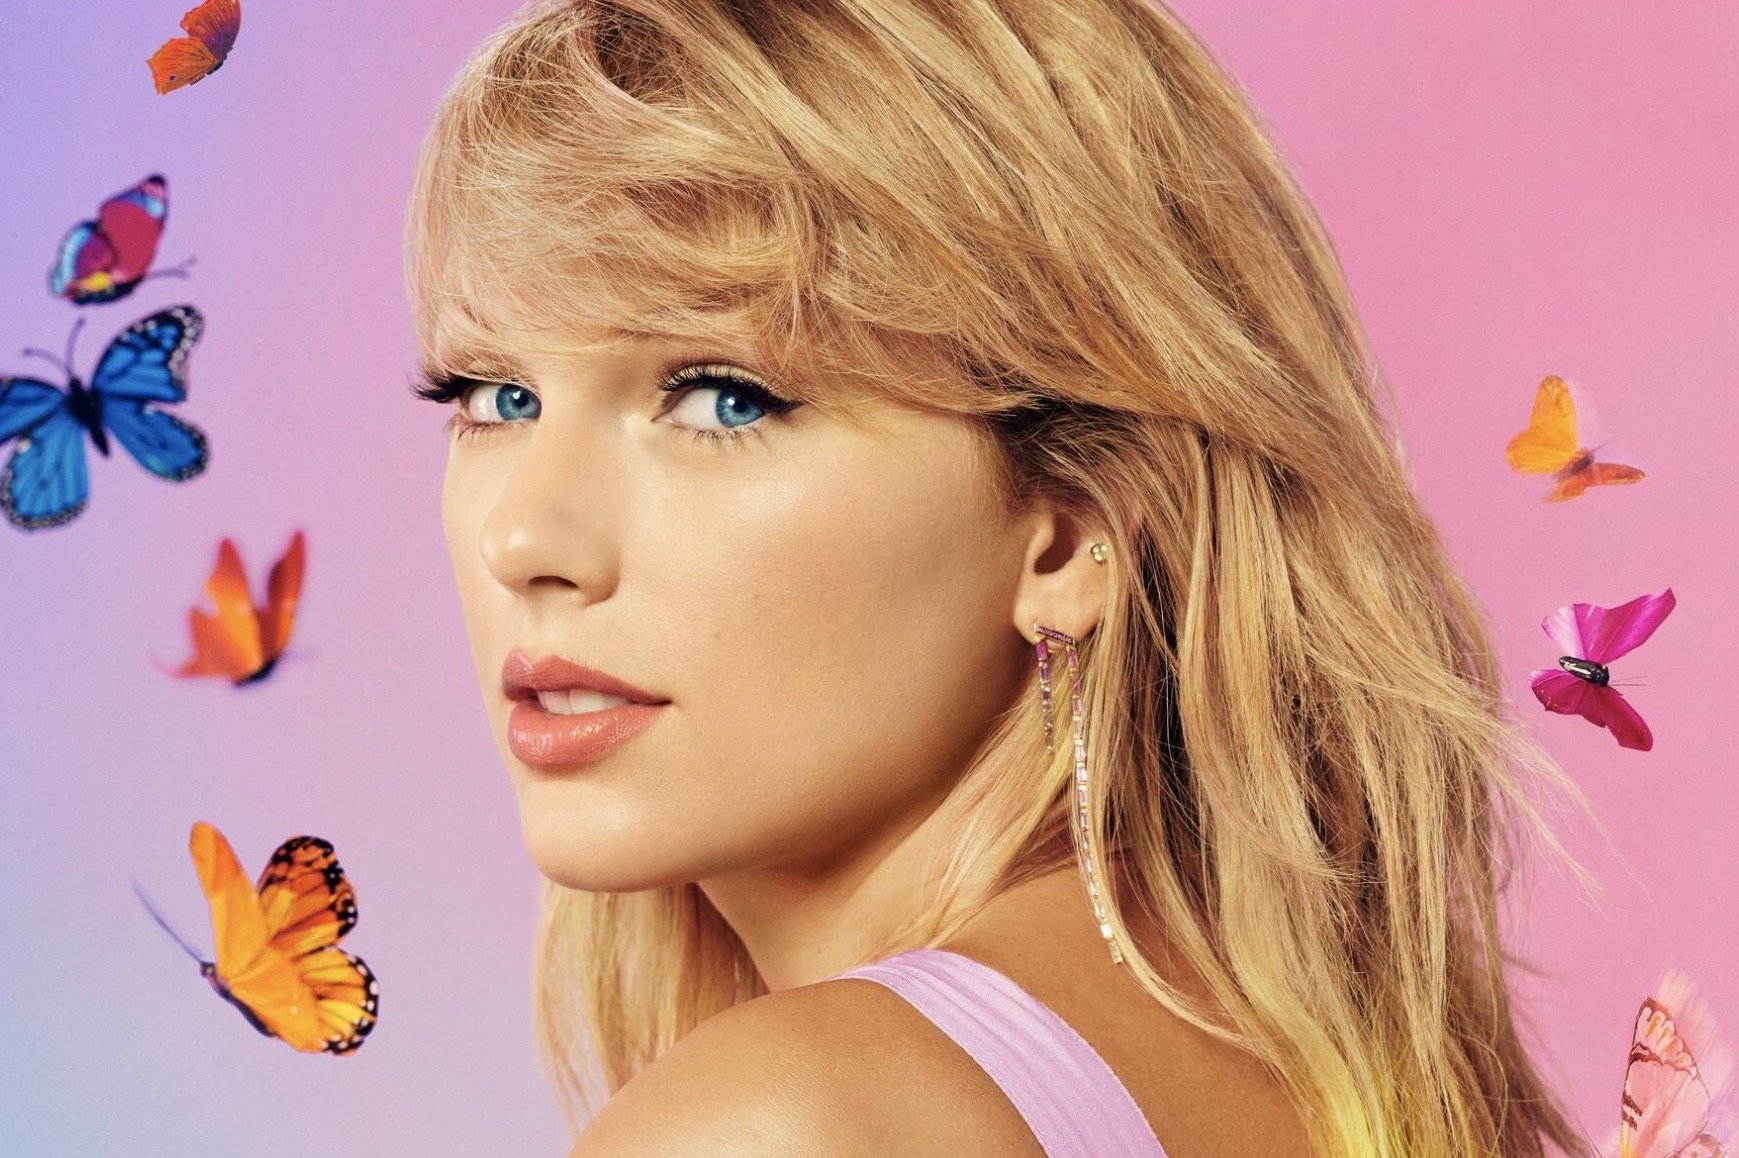 Taylor Swifts Newest Album Lover Now Available On Apple